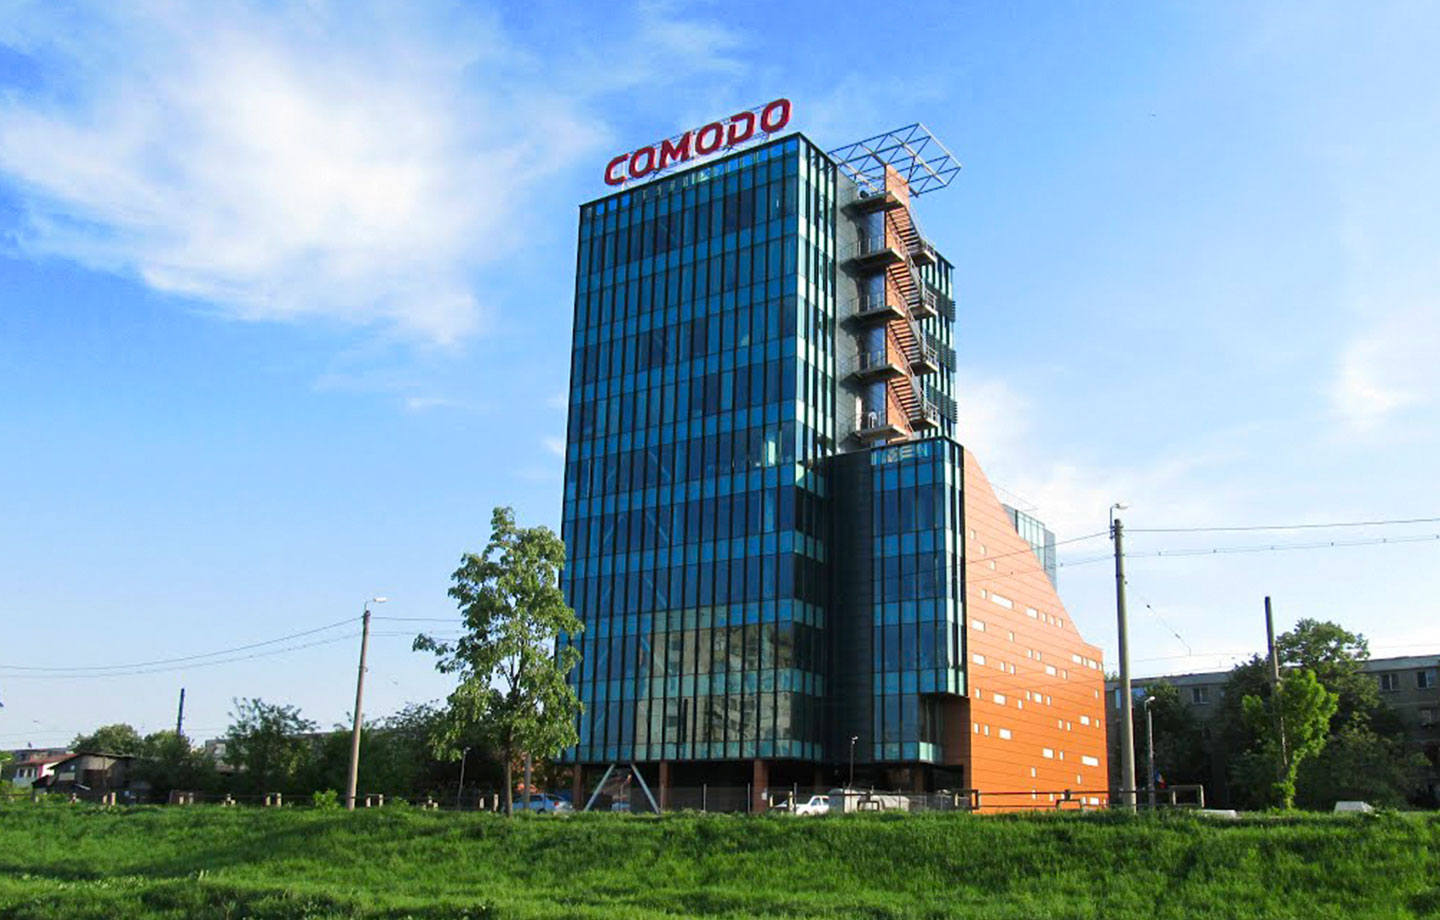 Comodo group is our friend